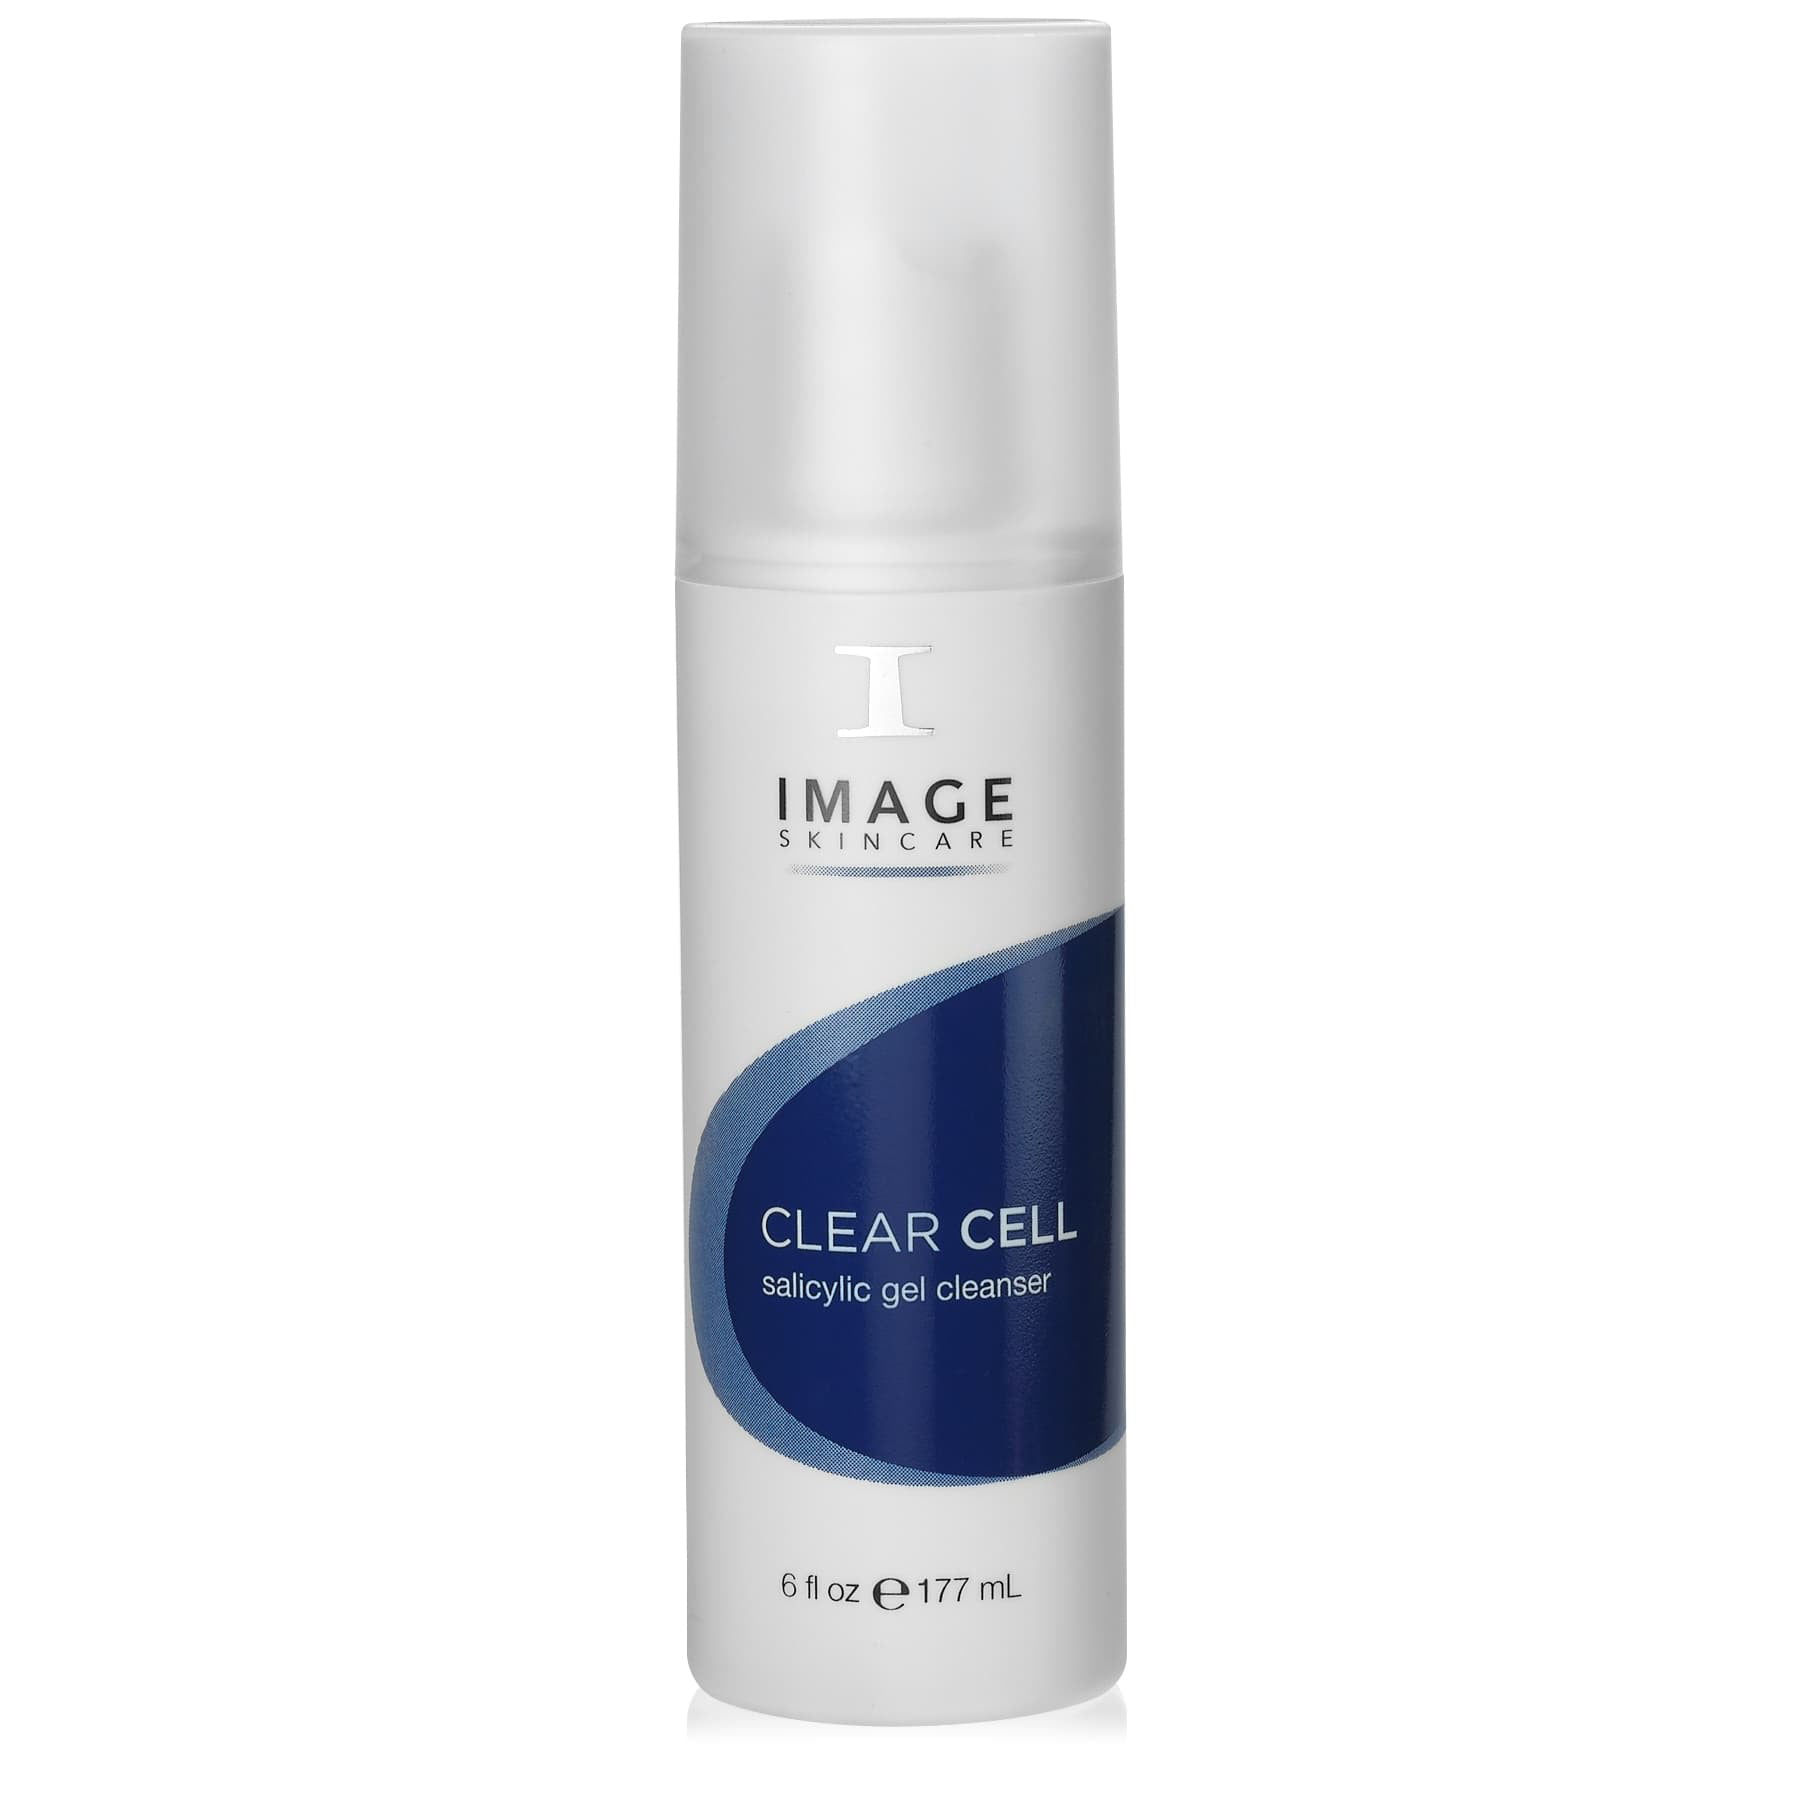 Clear cell. Clear Cell Medicated acne Lotion. Эмульсия Clear Cell. Image Clear Cell очищающий салициловый гель 177мл. Пенка для умывания image Skincare.